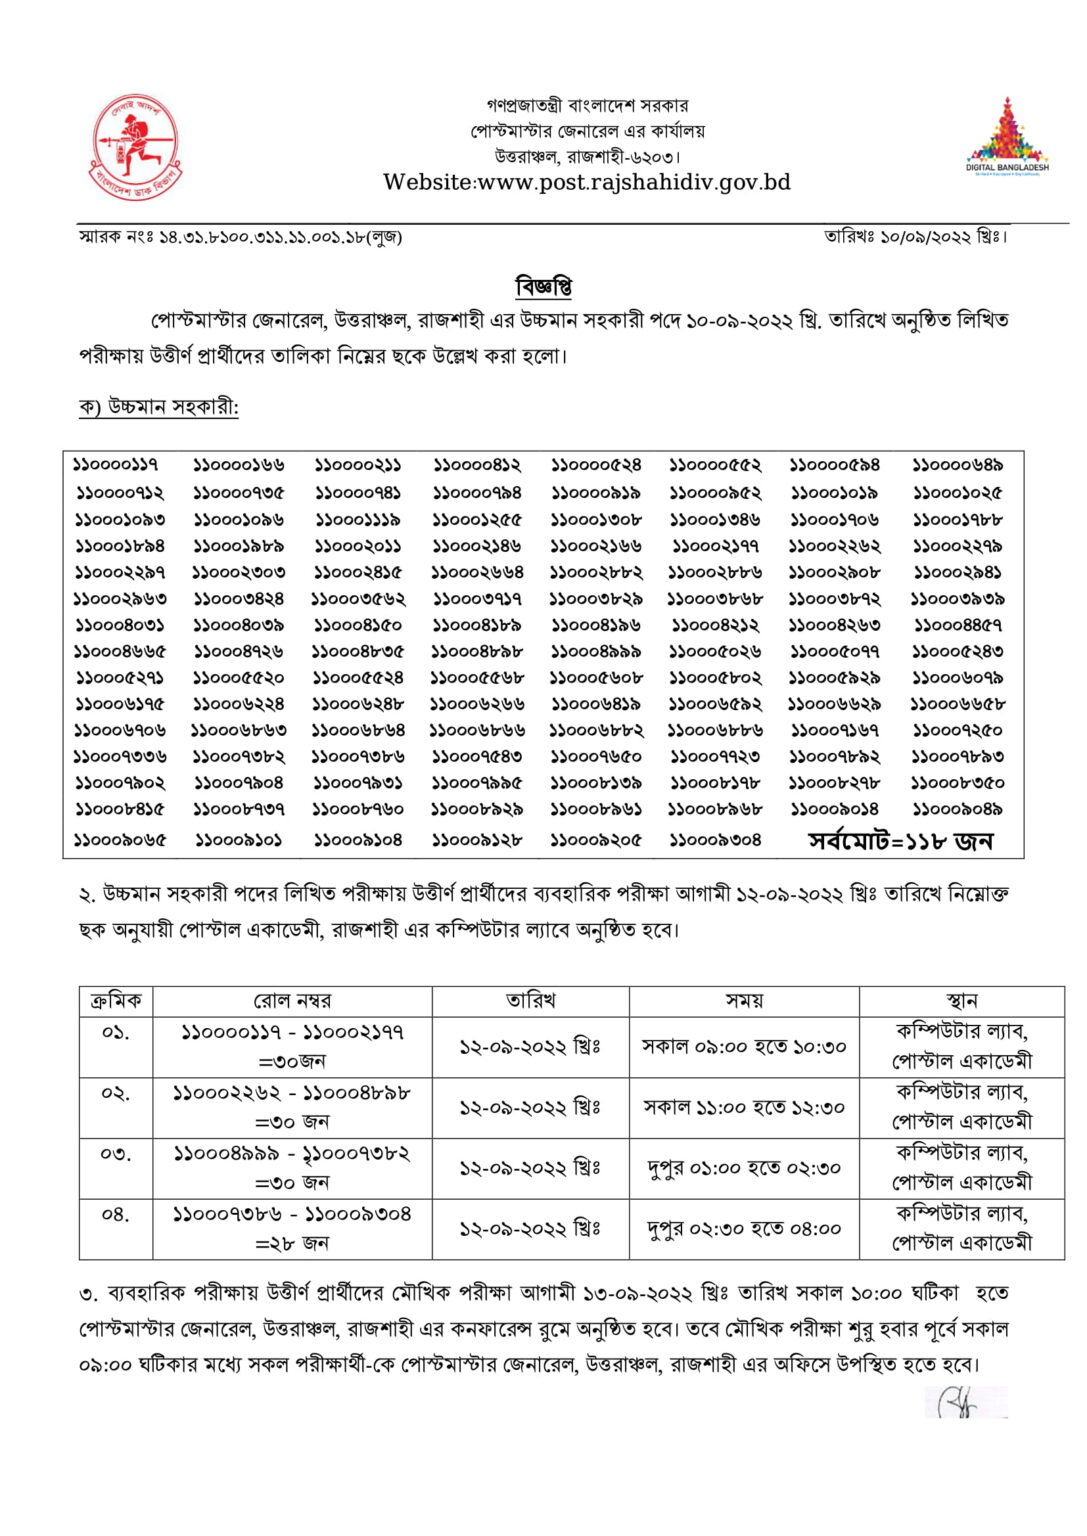 Office-of-the-Postmaster-General-Northern-Circle-PMGNC-Exam-Result-2022-PDF-1-1087x1536